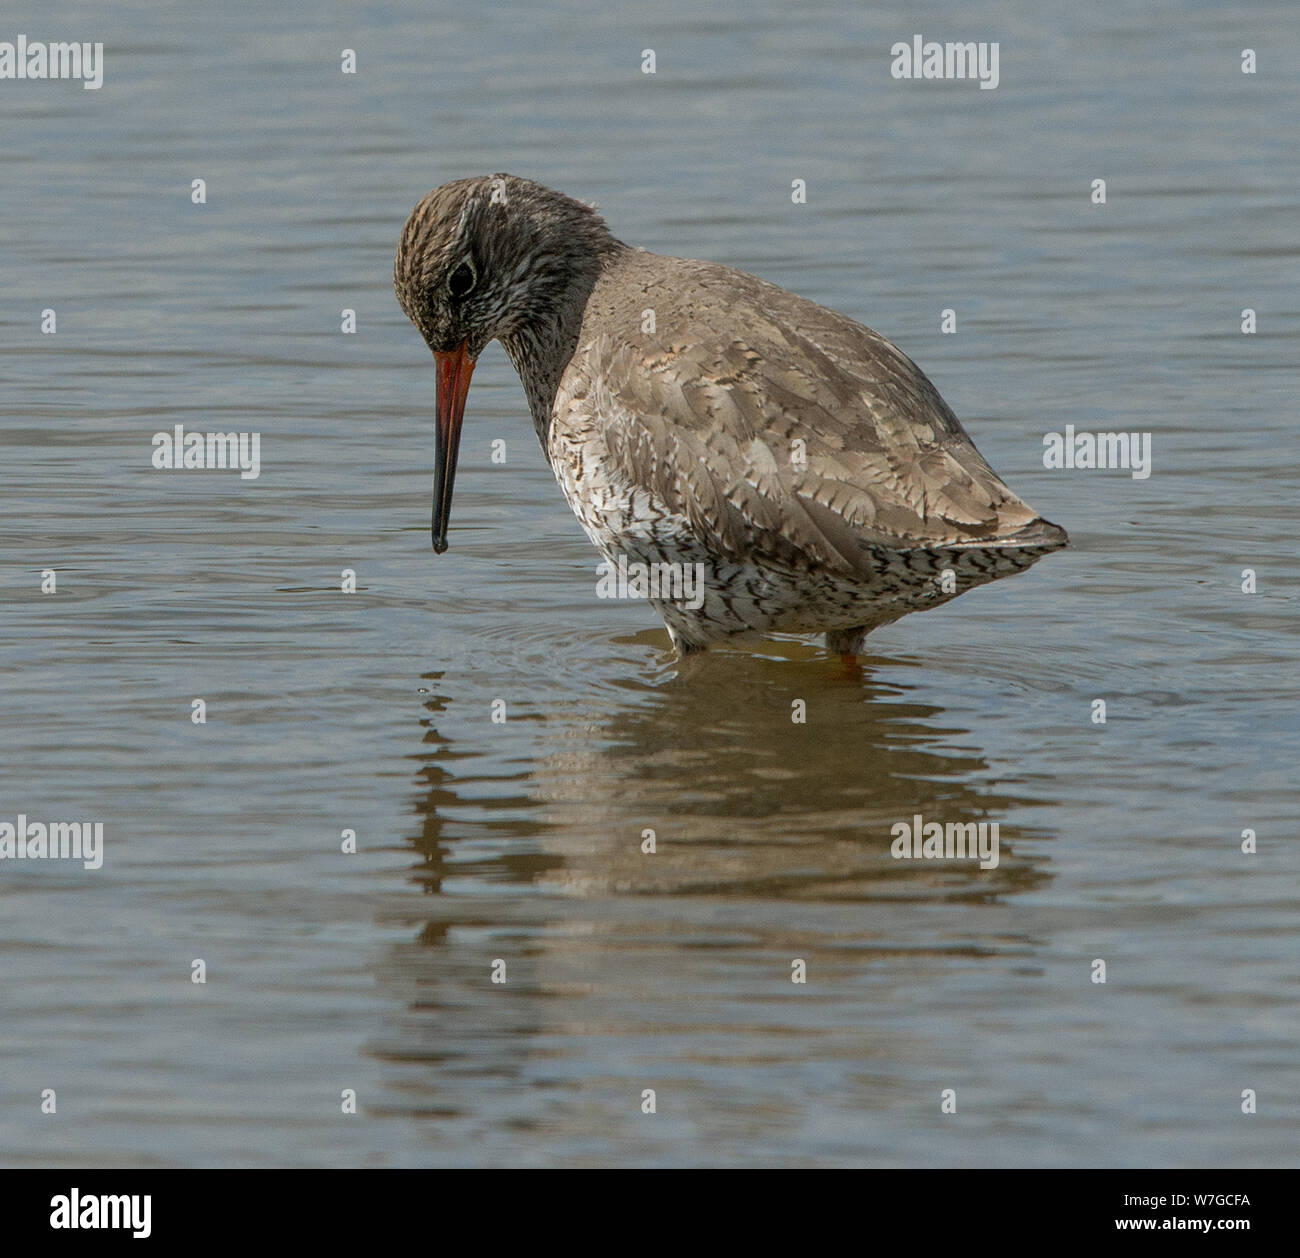 Redshank standing in water with it's head turned as it looks into the water with plumage and features clearly seen Stock Photo